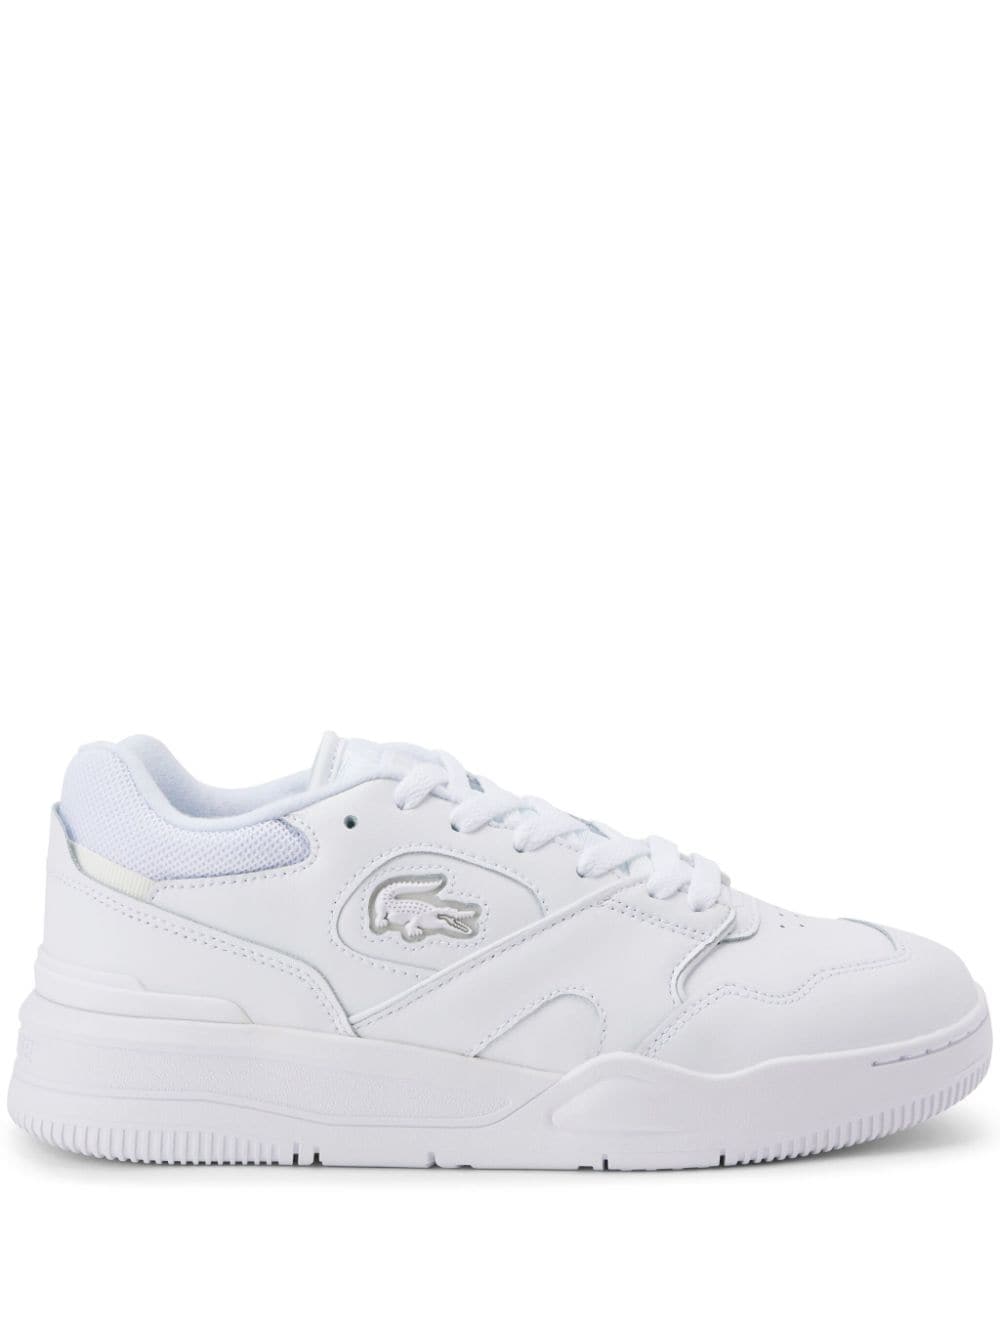 Lacoste Lineshot Leather Sneakers In White